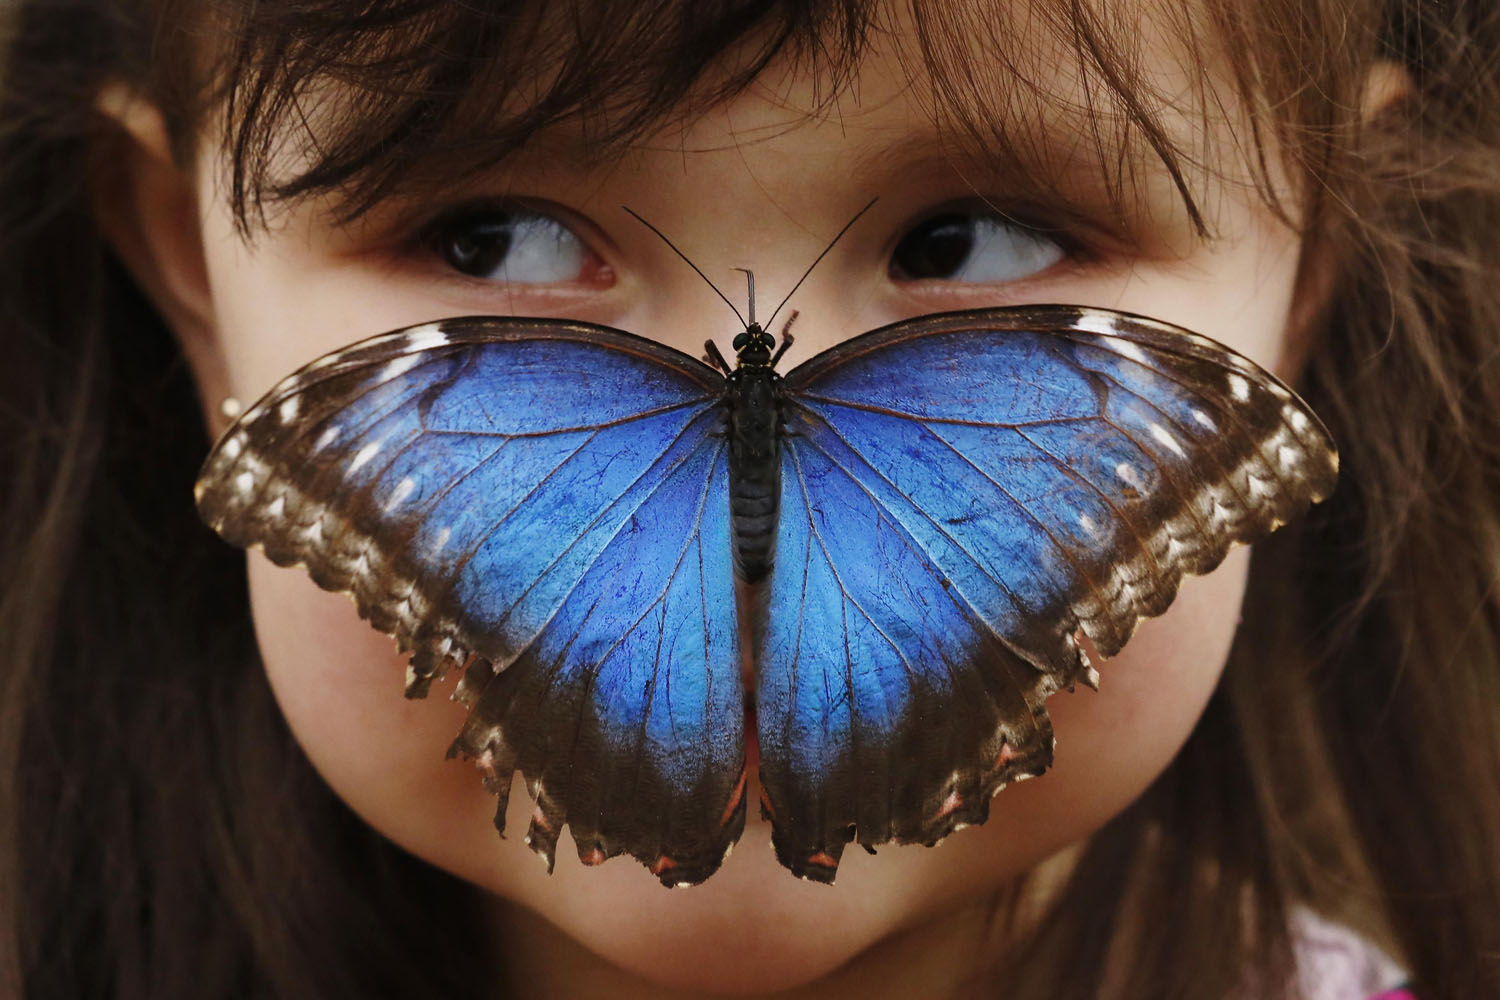 Three year old, Stella Ferruzola poses with a Blue Morpho butterfly on her nose at the Sensational Butterflies Exhibition at the Natural History Museum in London